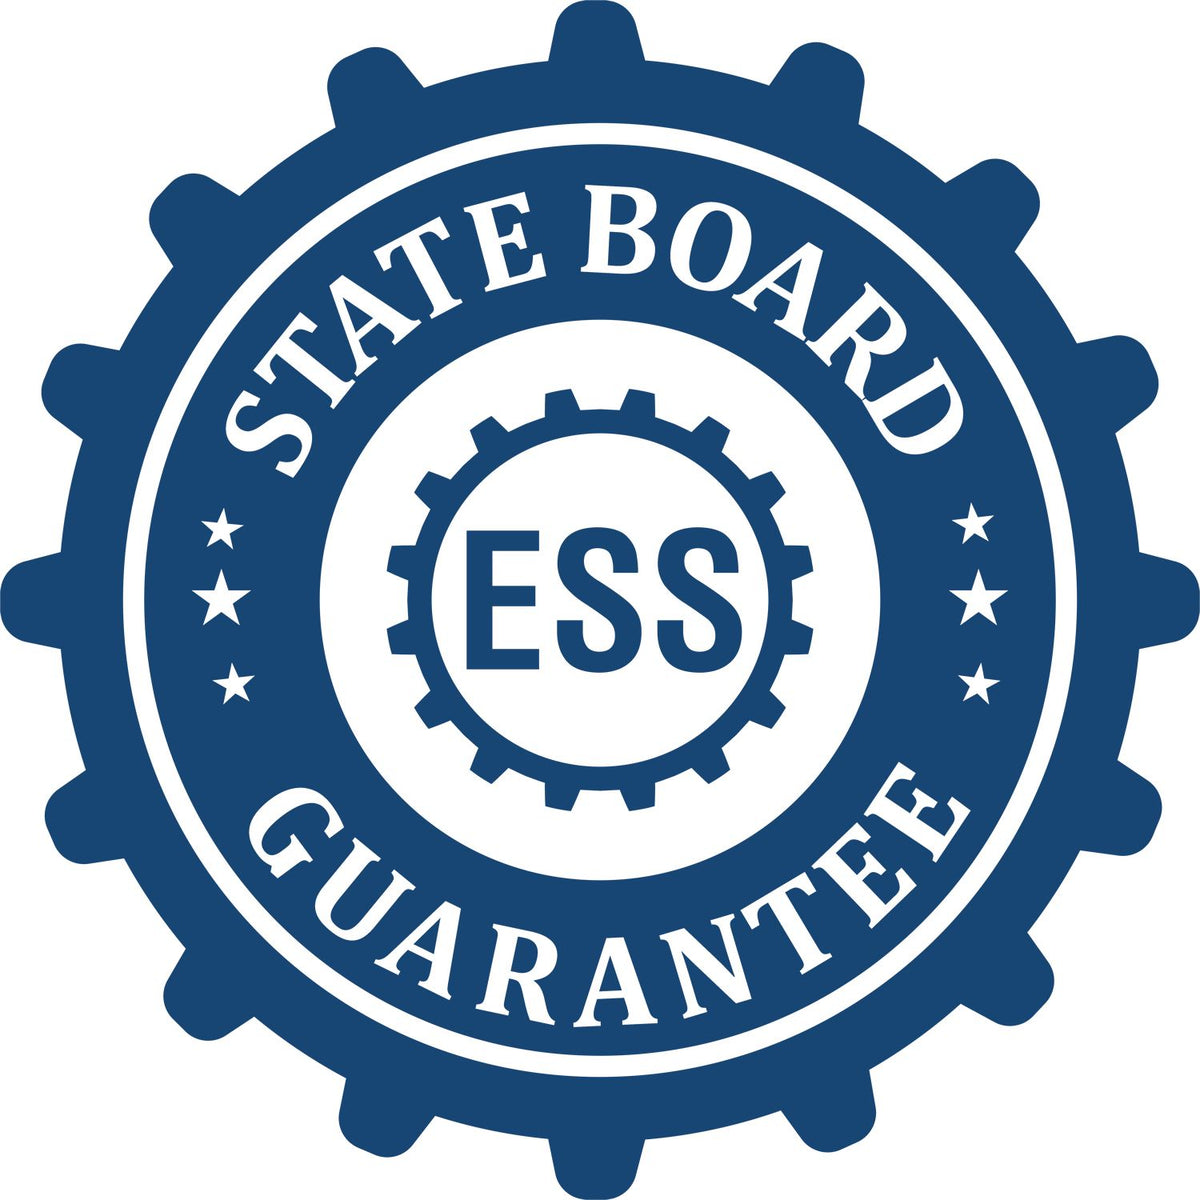 An emblem in a gear shape illustrating a state board guarantee for the State of Kansas Extended Long Reach Geologist Seal